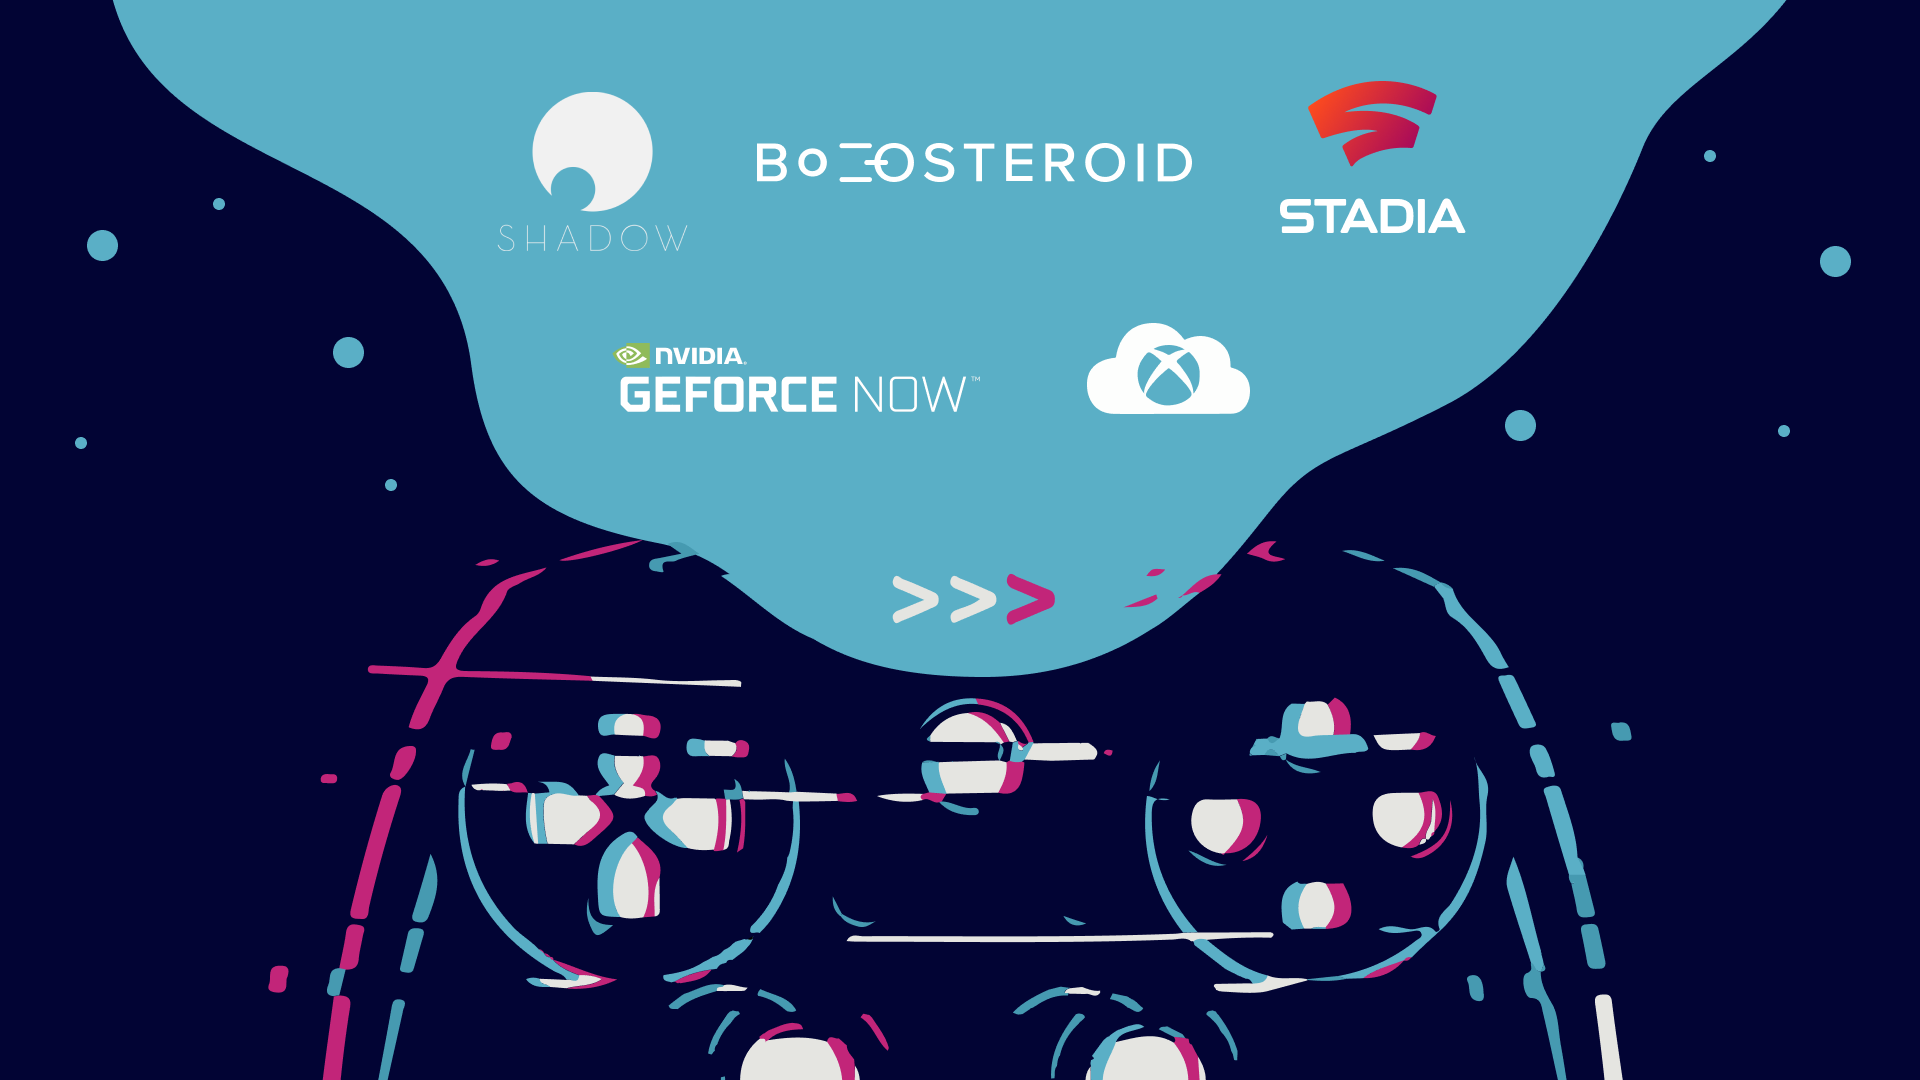 Boosteroid - is the cloud gaming service of the future. Review and